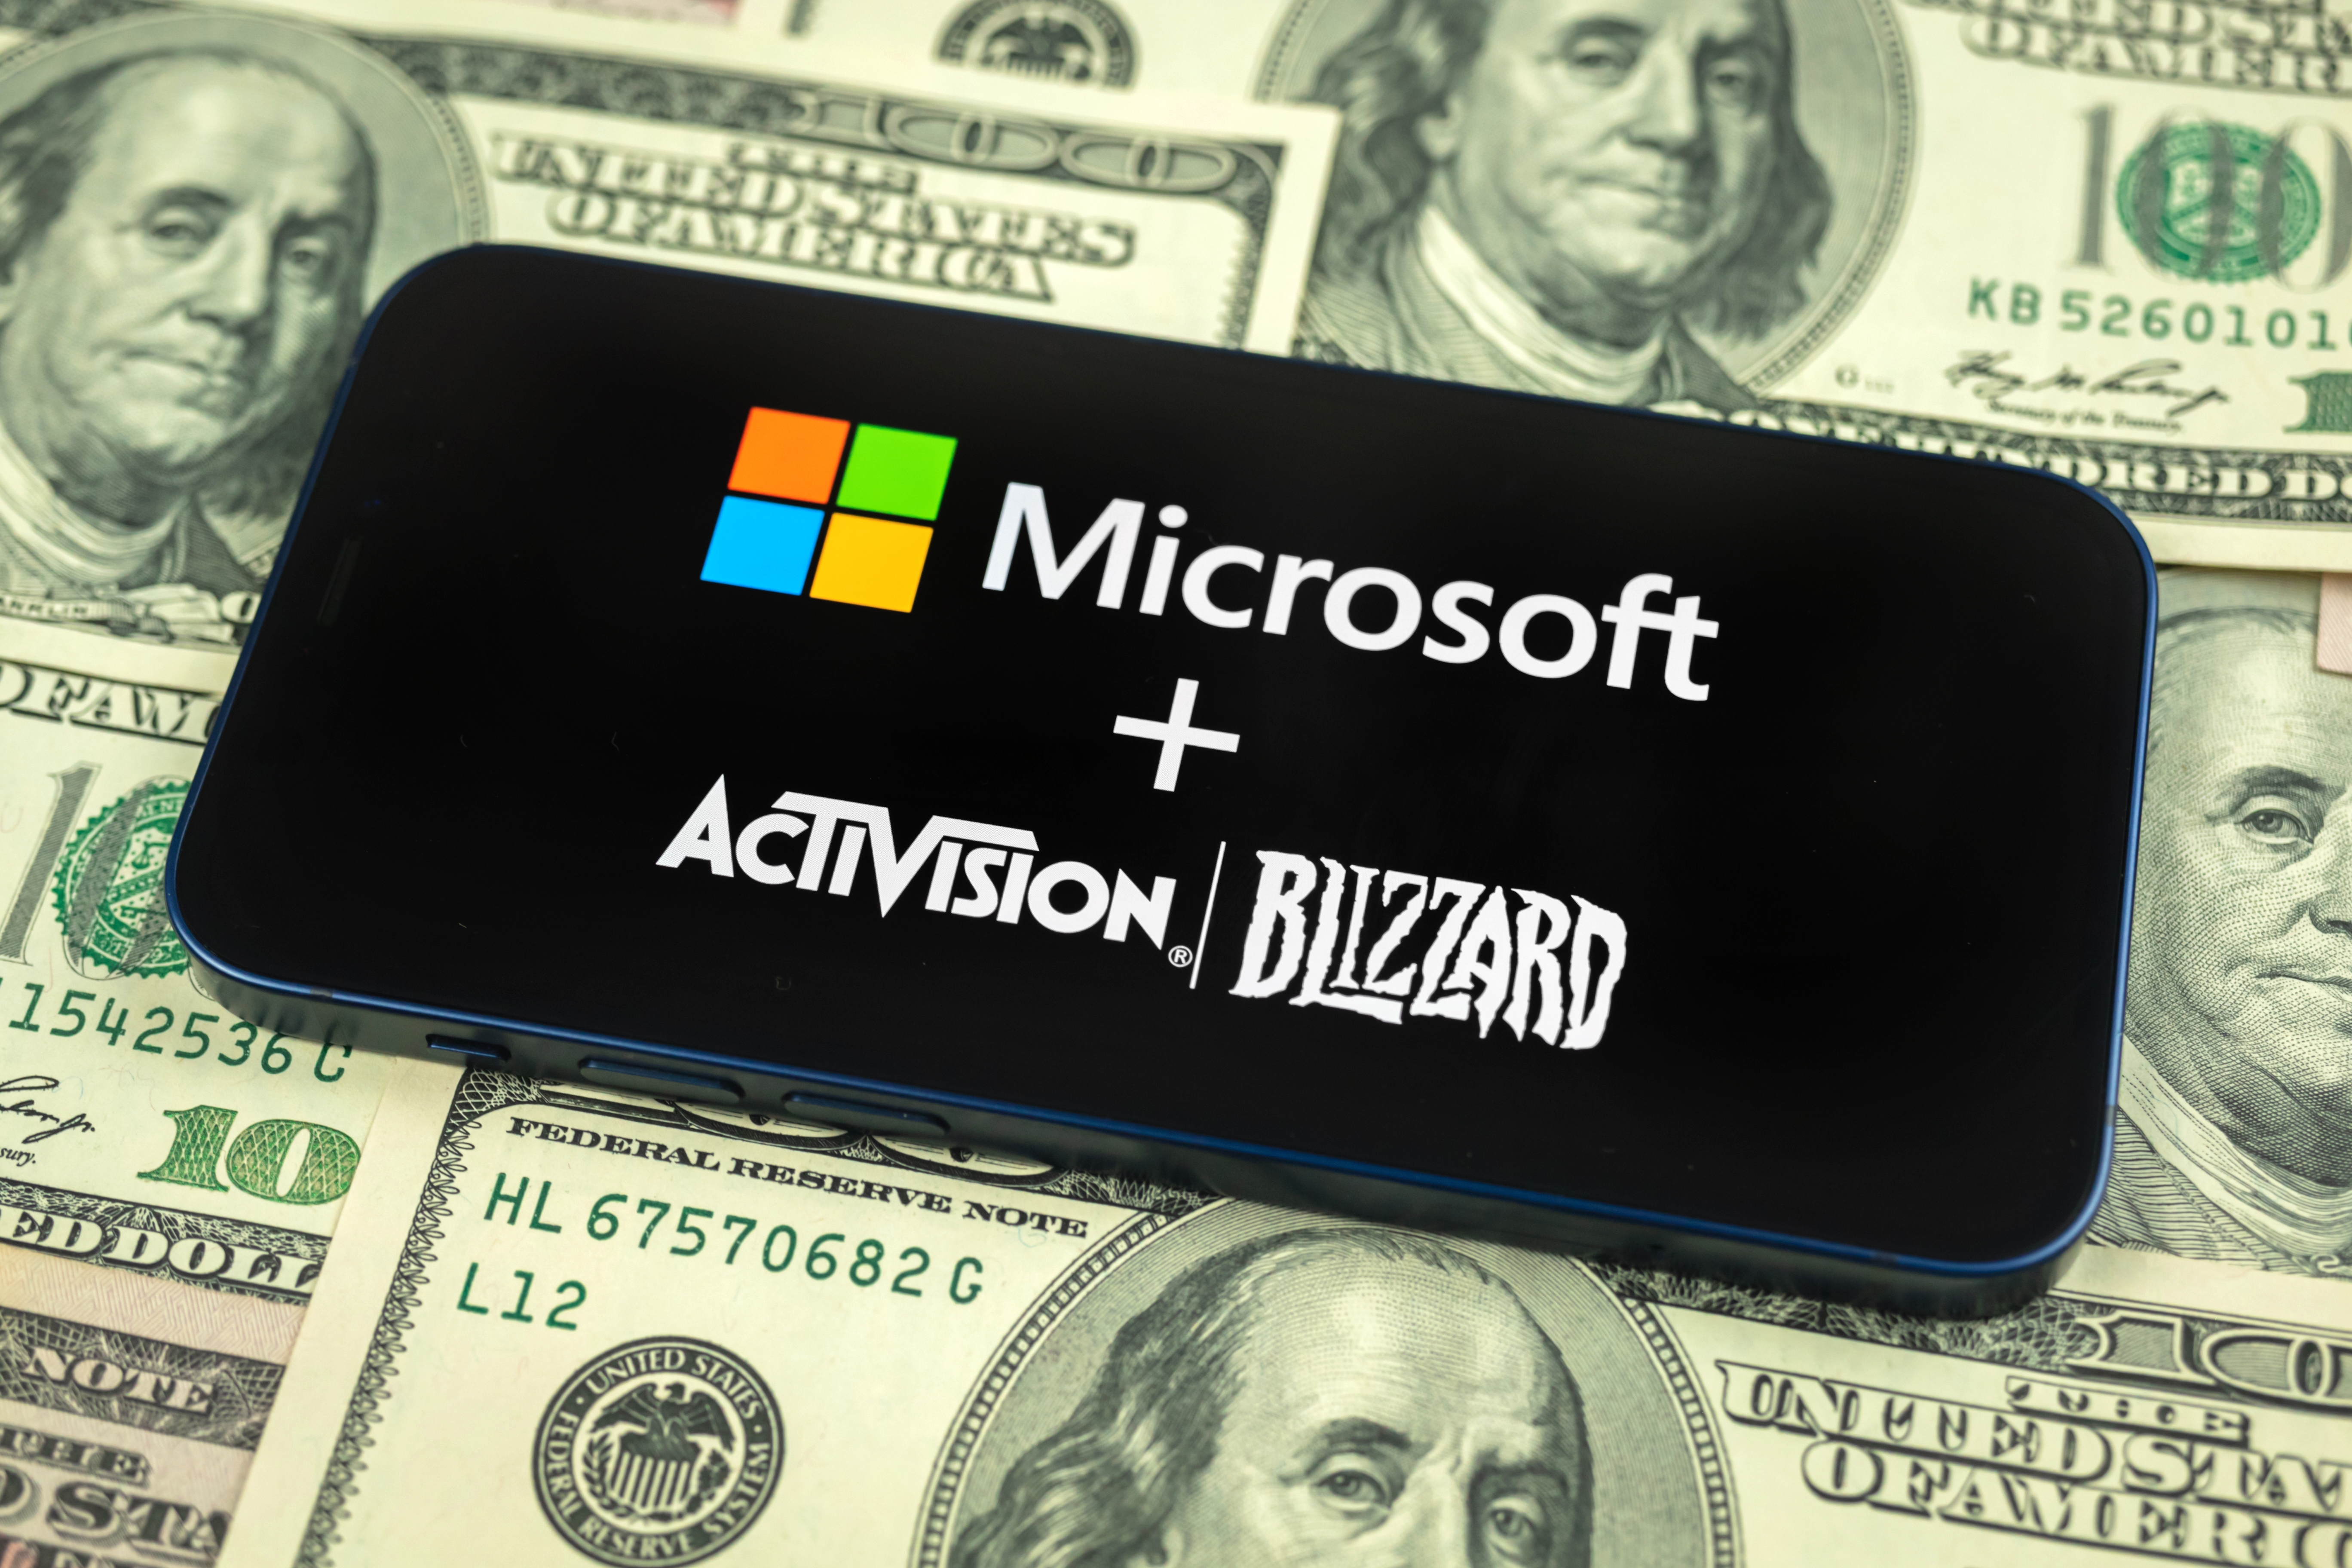 75% of public comments on Microsoft-Activision were in favor of